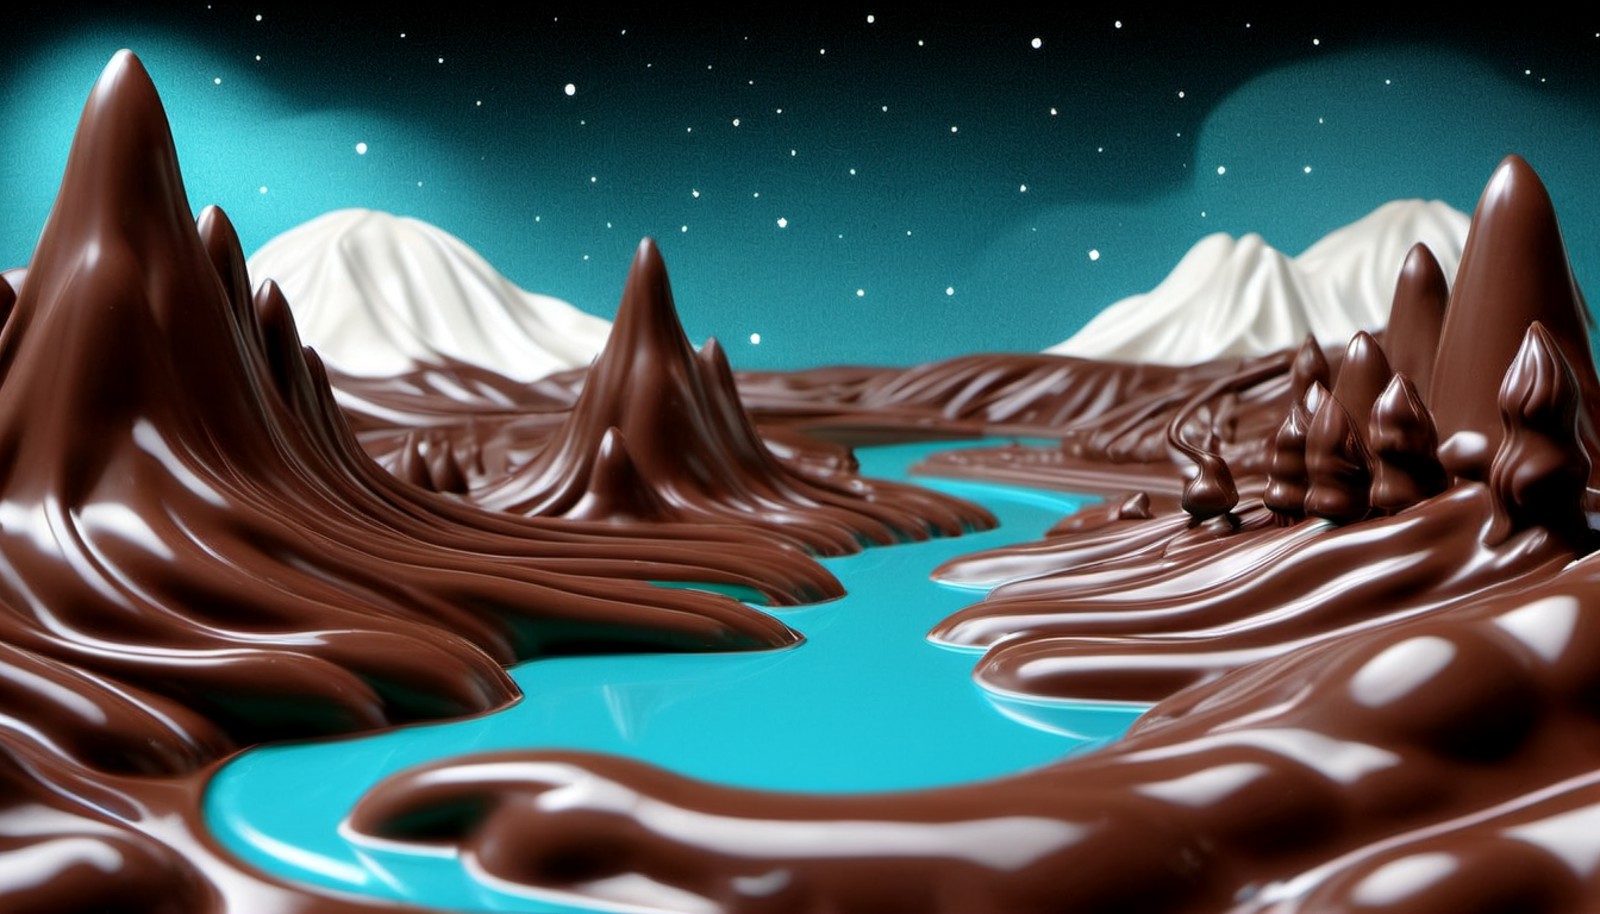 ChocolateRay, landscape of a White and Aqua Blue Rivendell, it is Light, wearing made entirely of chocolate with zalij des...